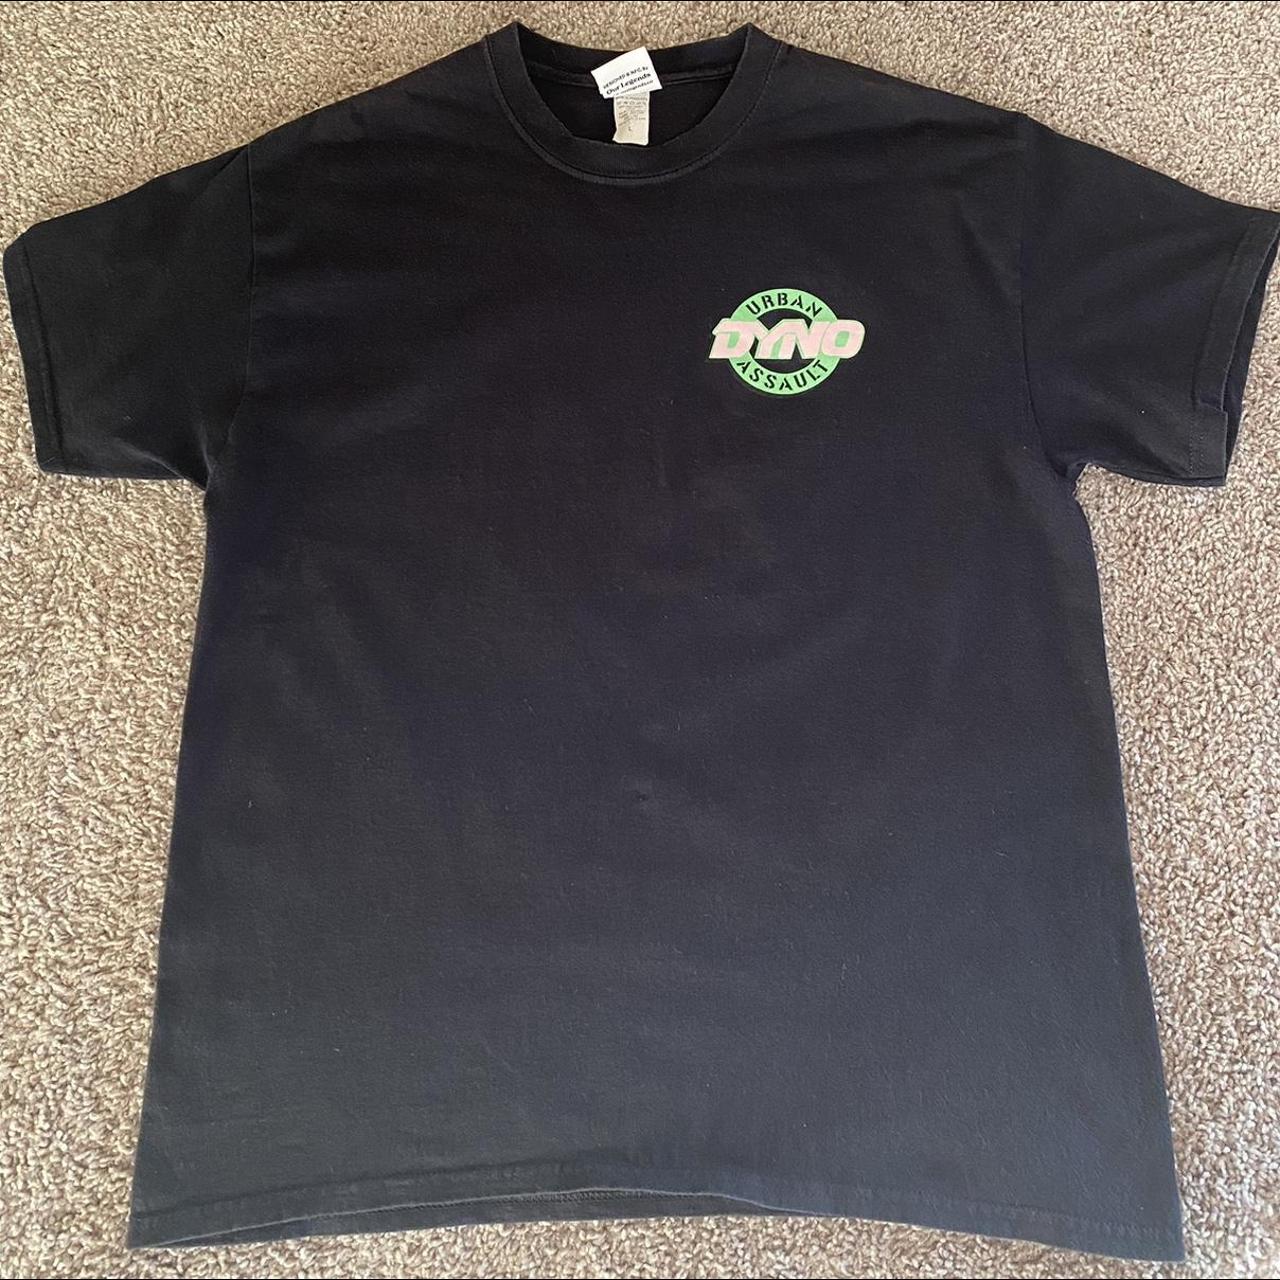 Our Legacy Men's Black and Green T-shirt